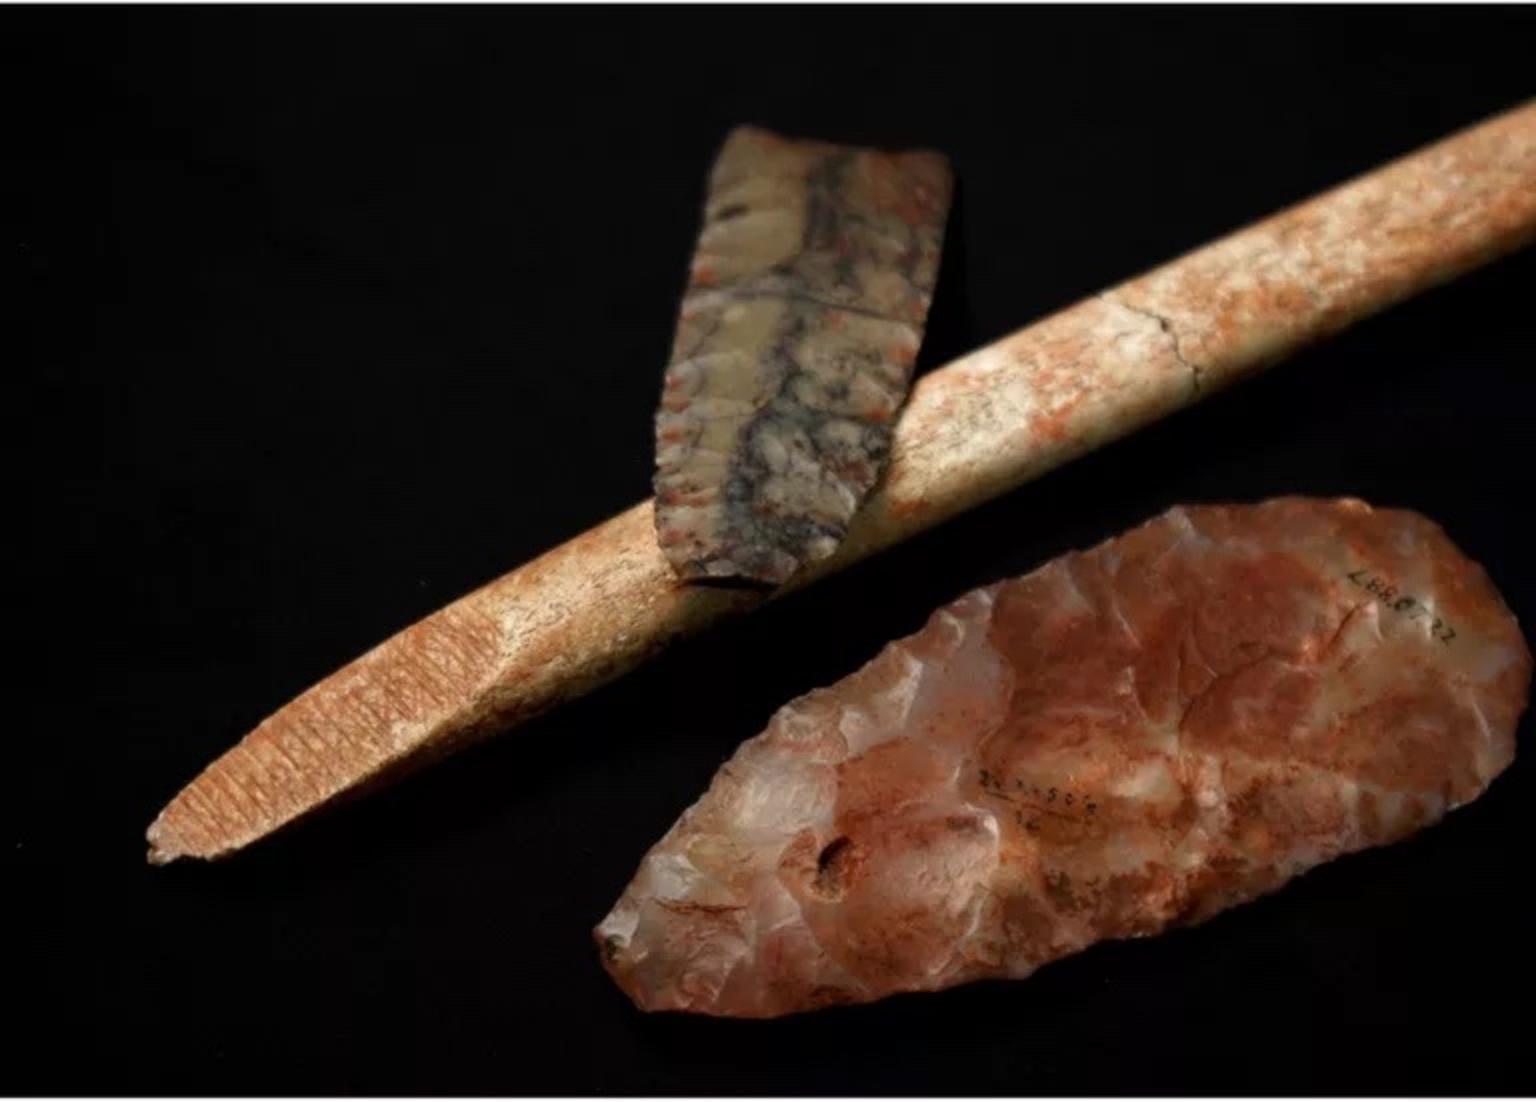 Clovis projective points unearthed at the Anzick site. Photo by Sarah Anzick